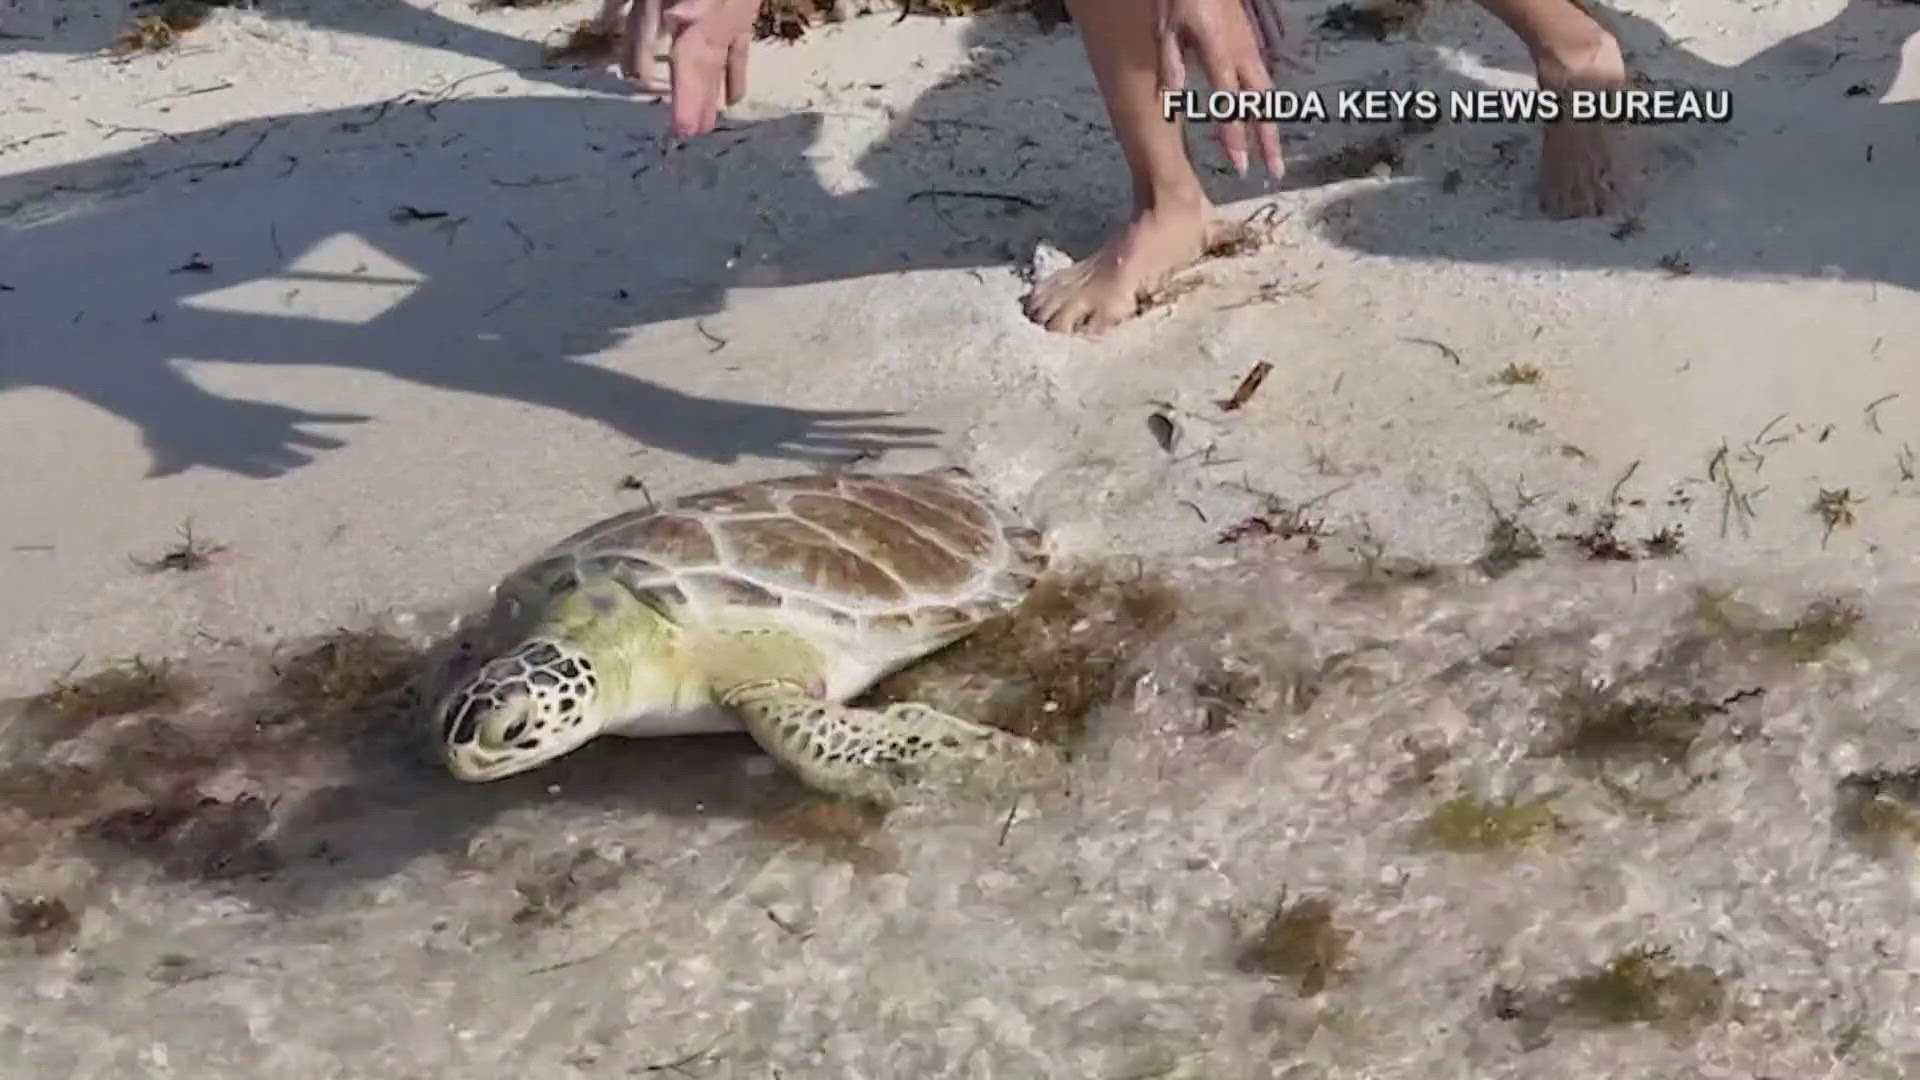 Workers from a Florida turtle hospital released two turtles that were rescued last year after they both needed surgery to remove tumors.